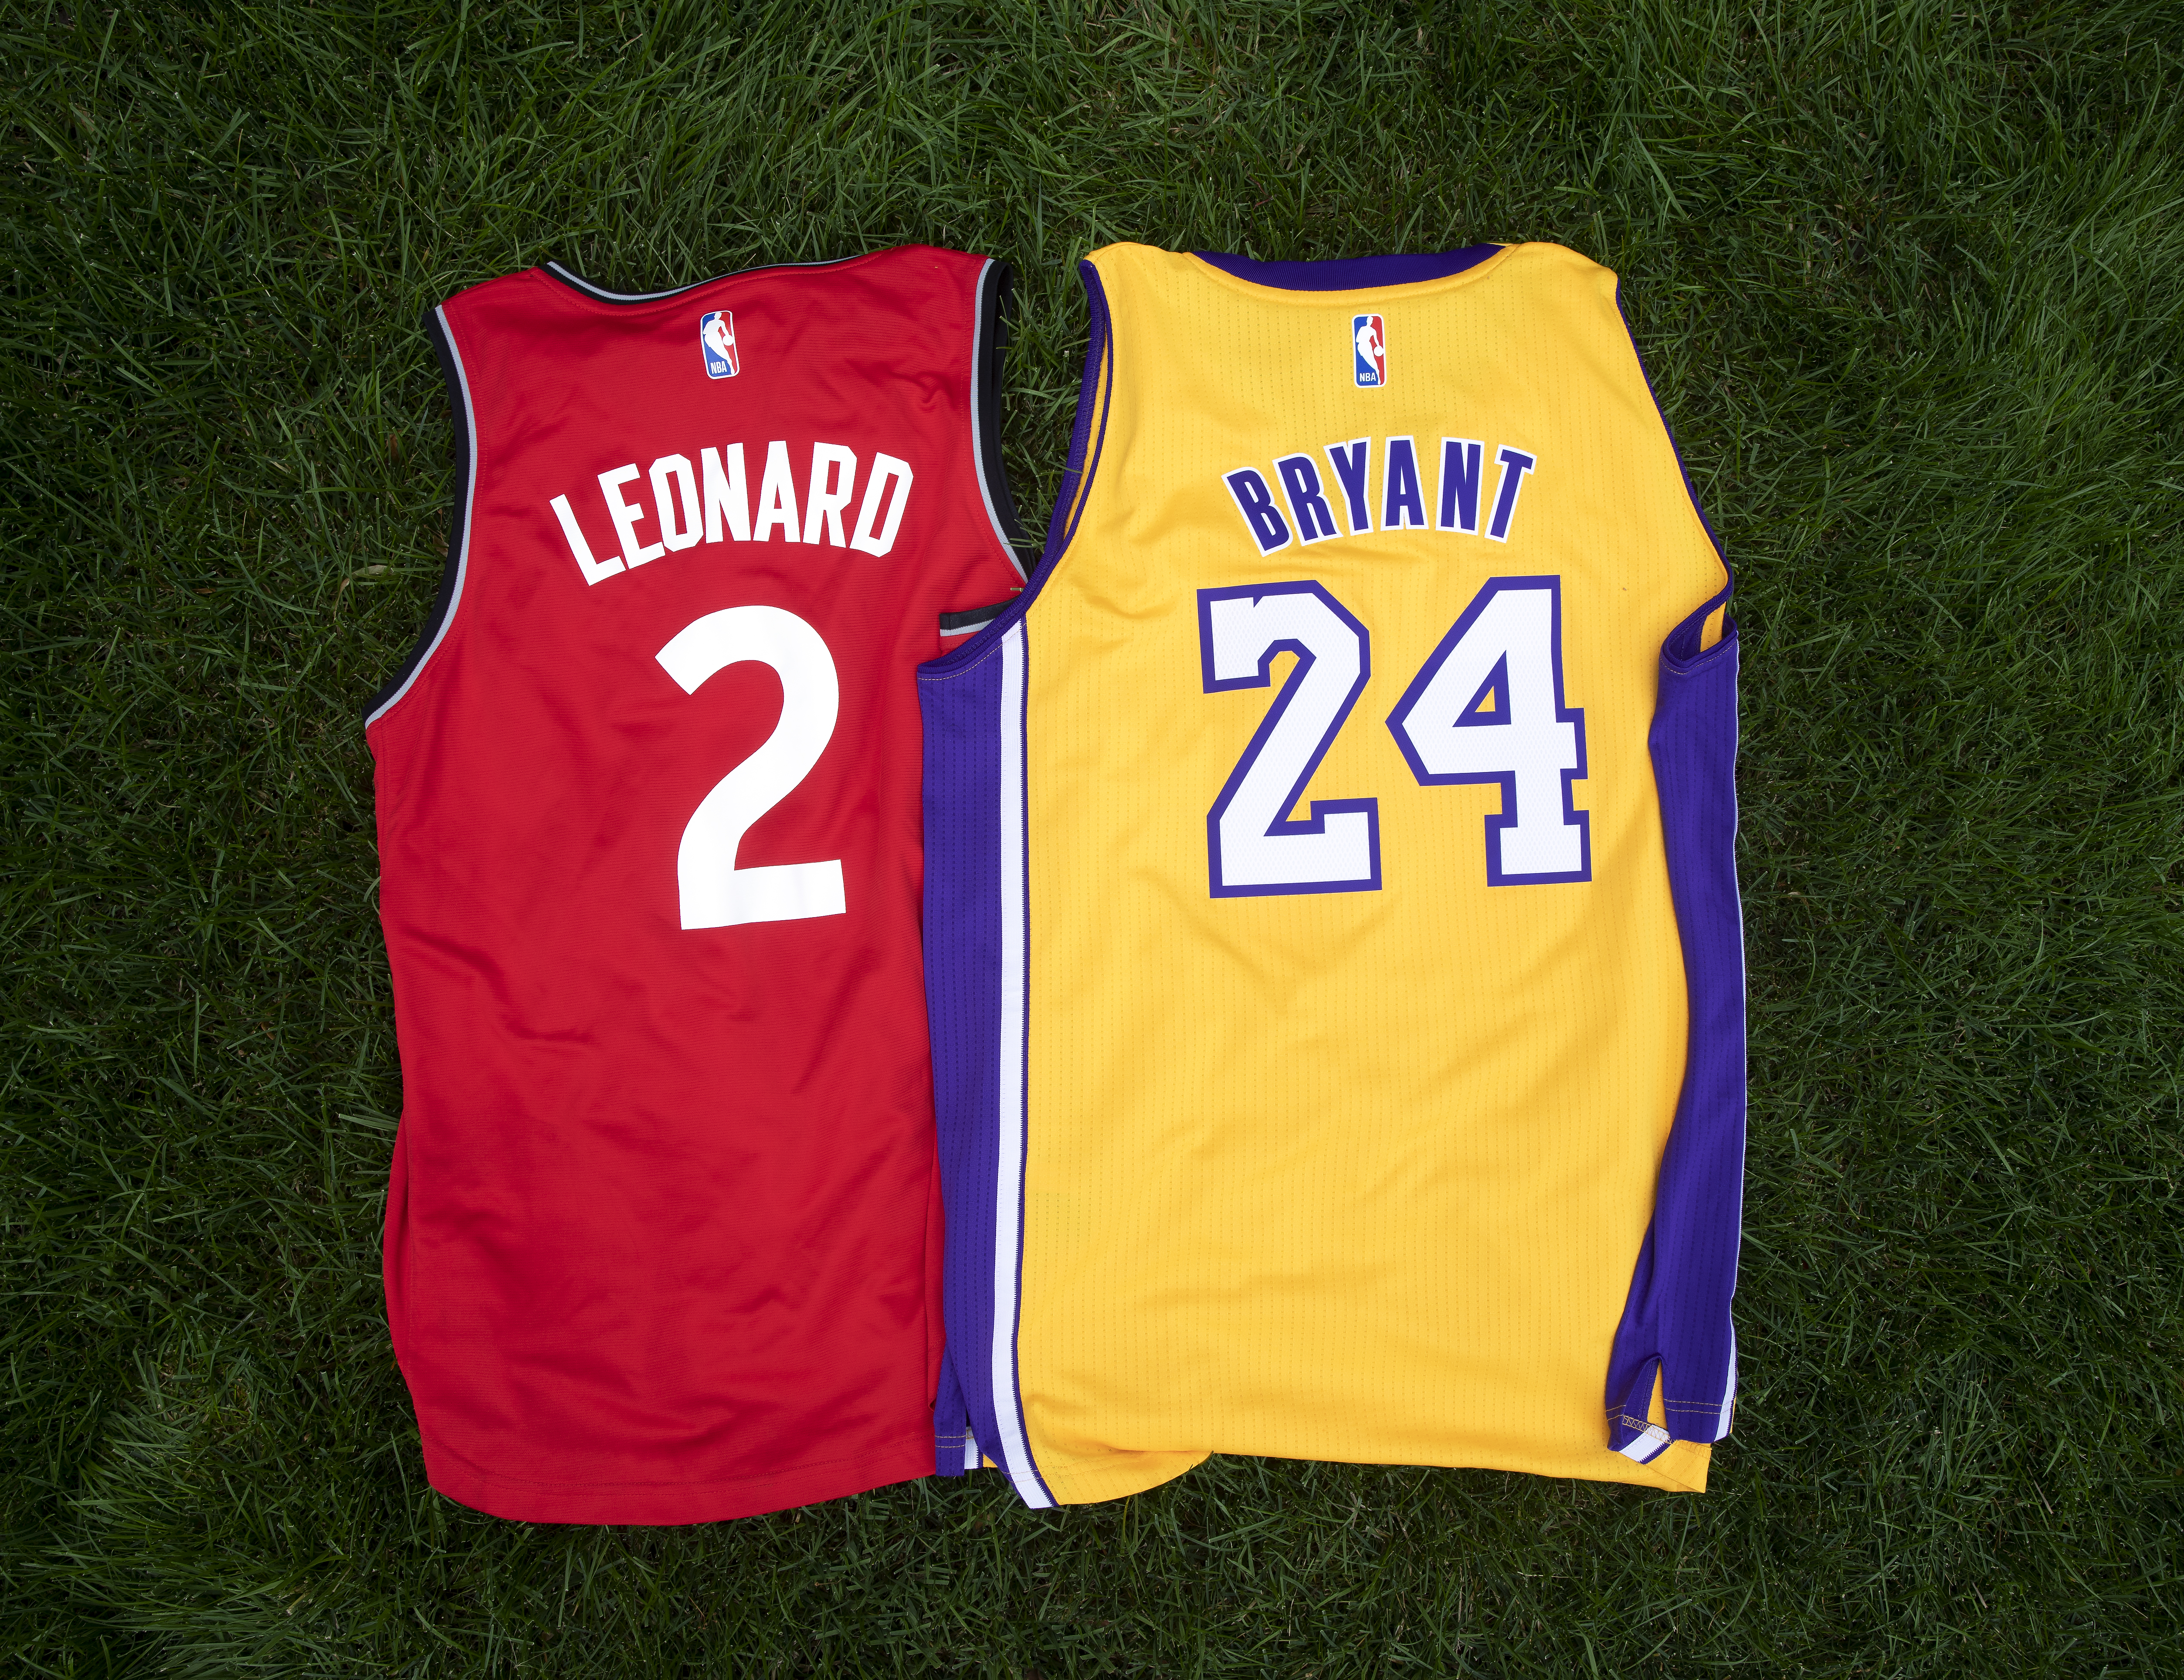 Authentic or knockoff — NBA jerseys - The Daily Universe